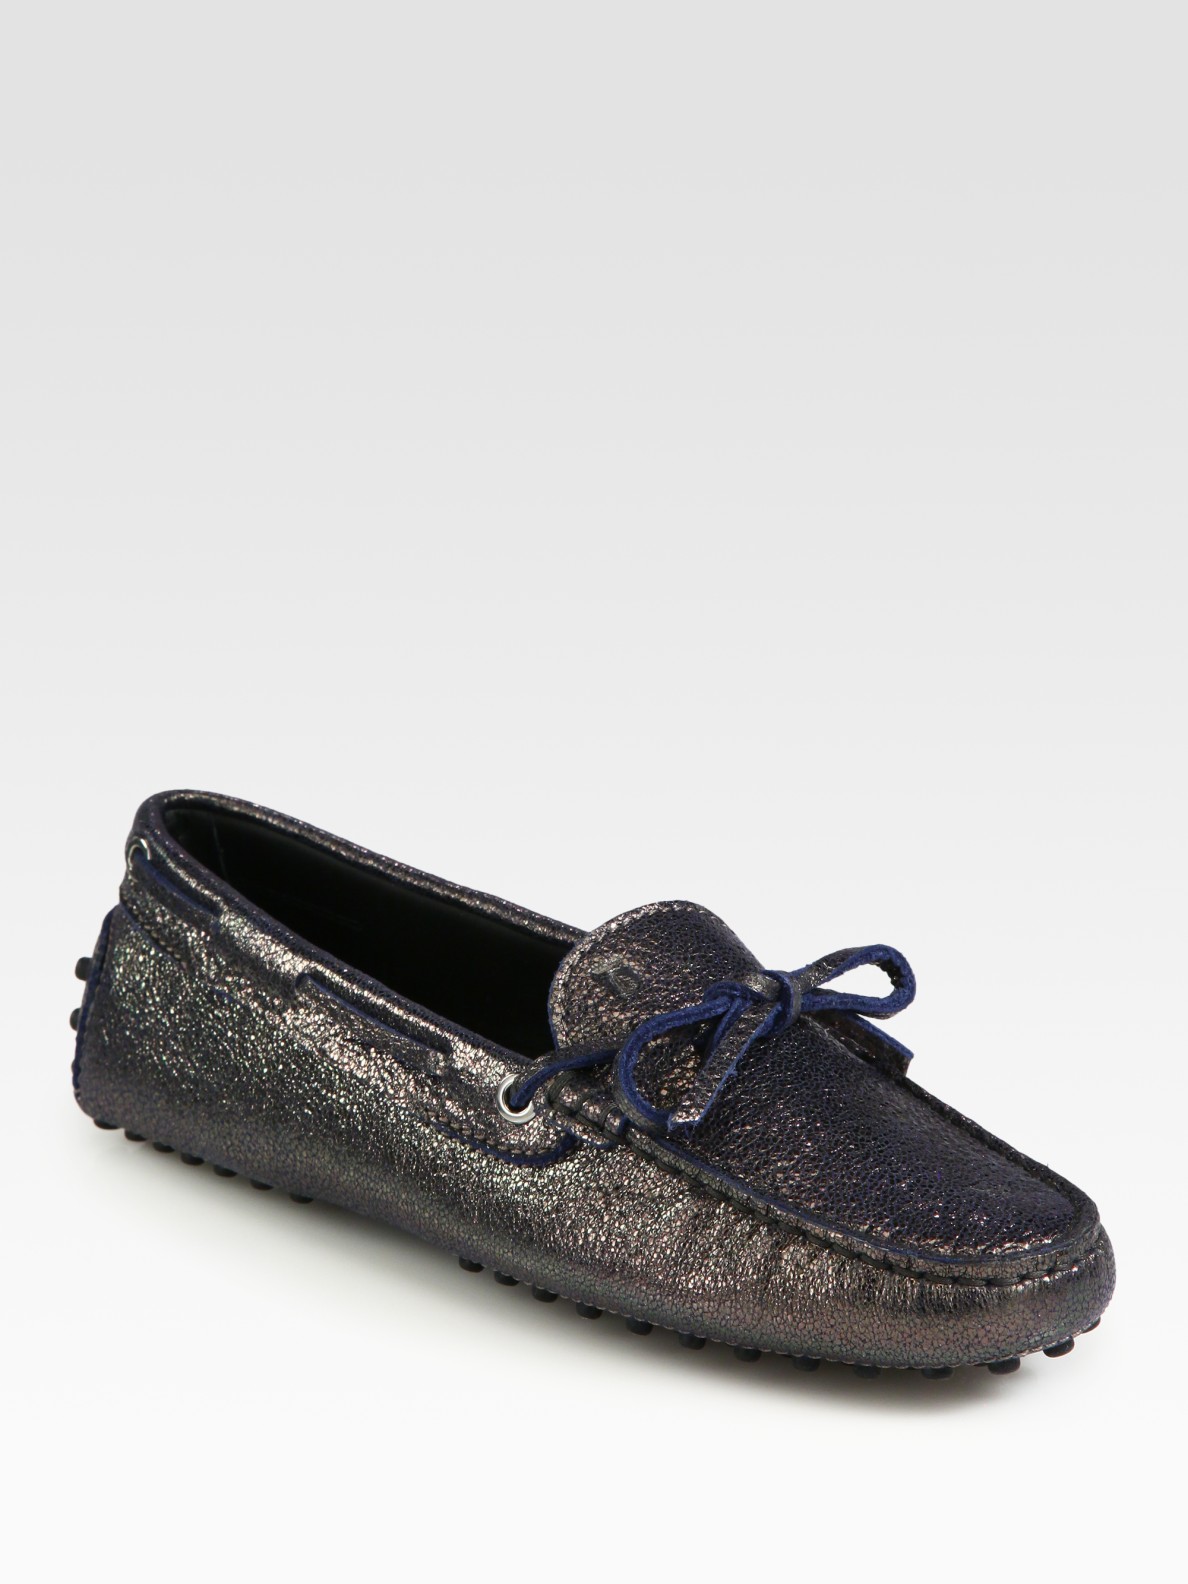 Tod's Bicolor Pebbled Metallic Leather Moccasin Loafers in Gray